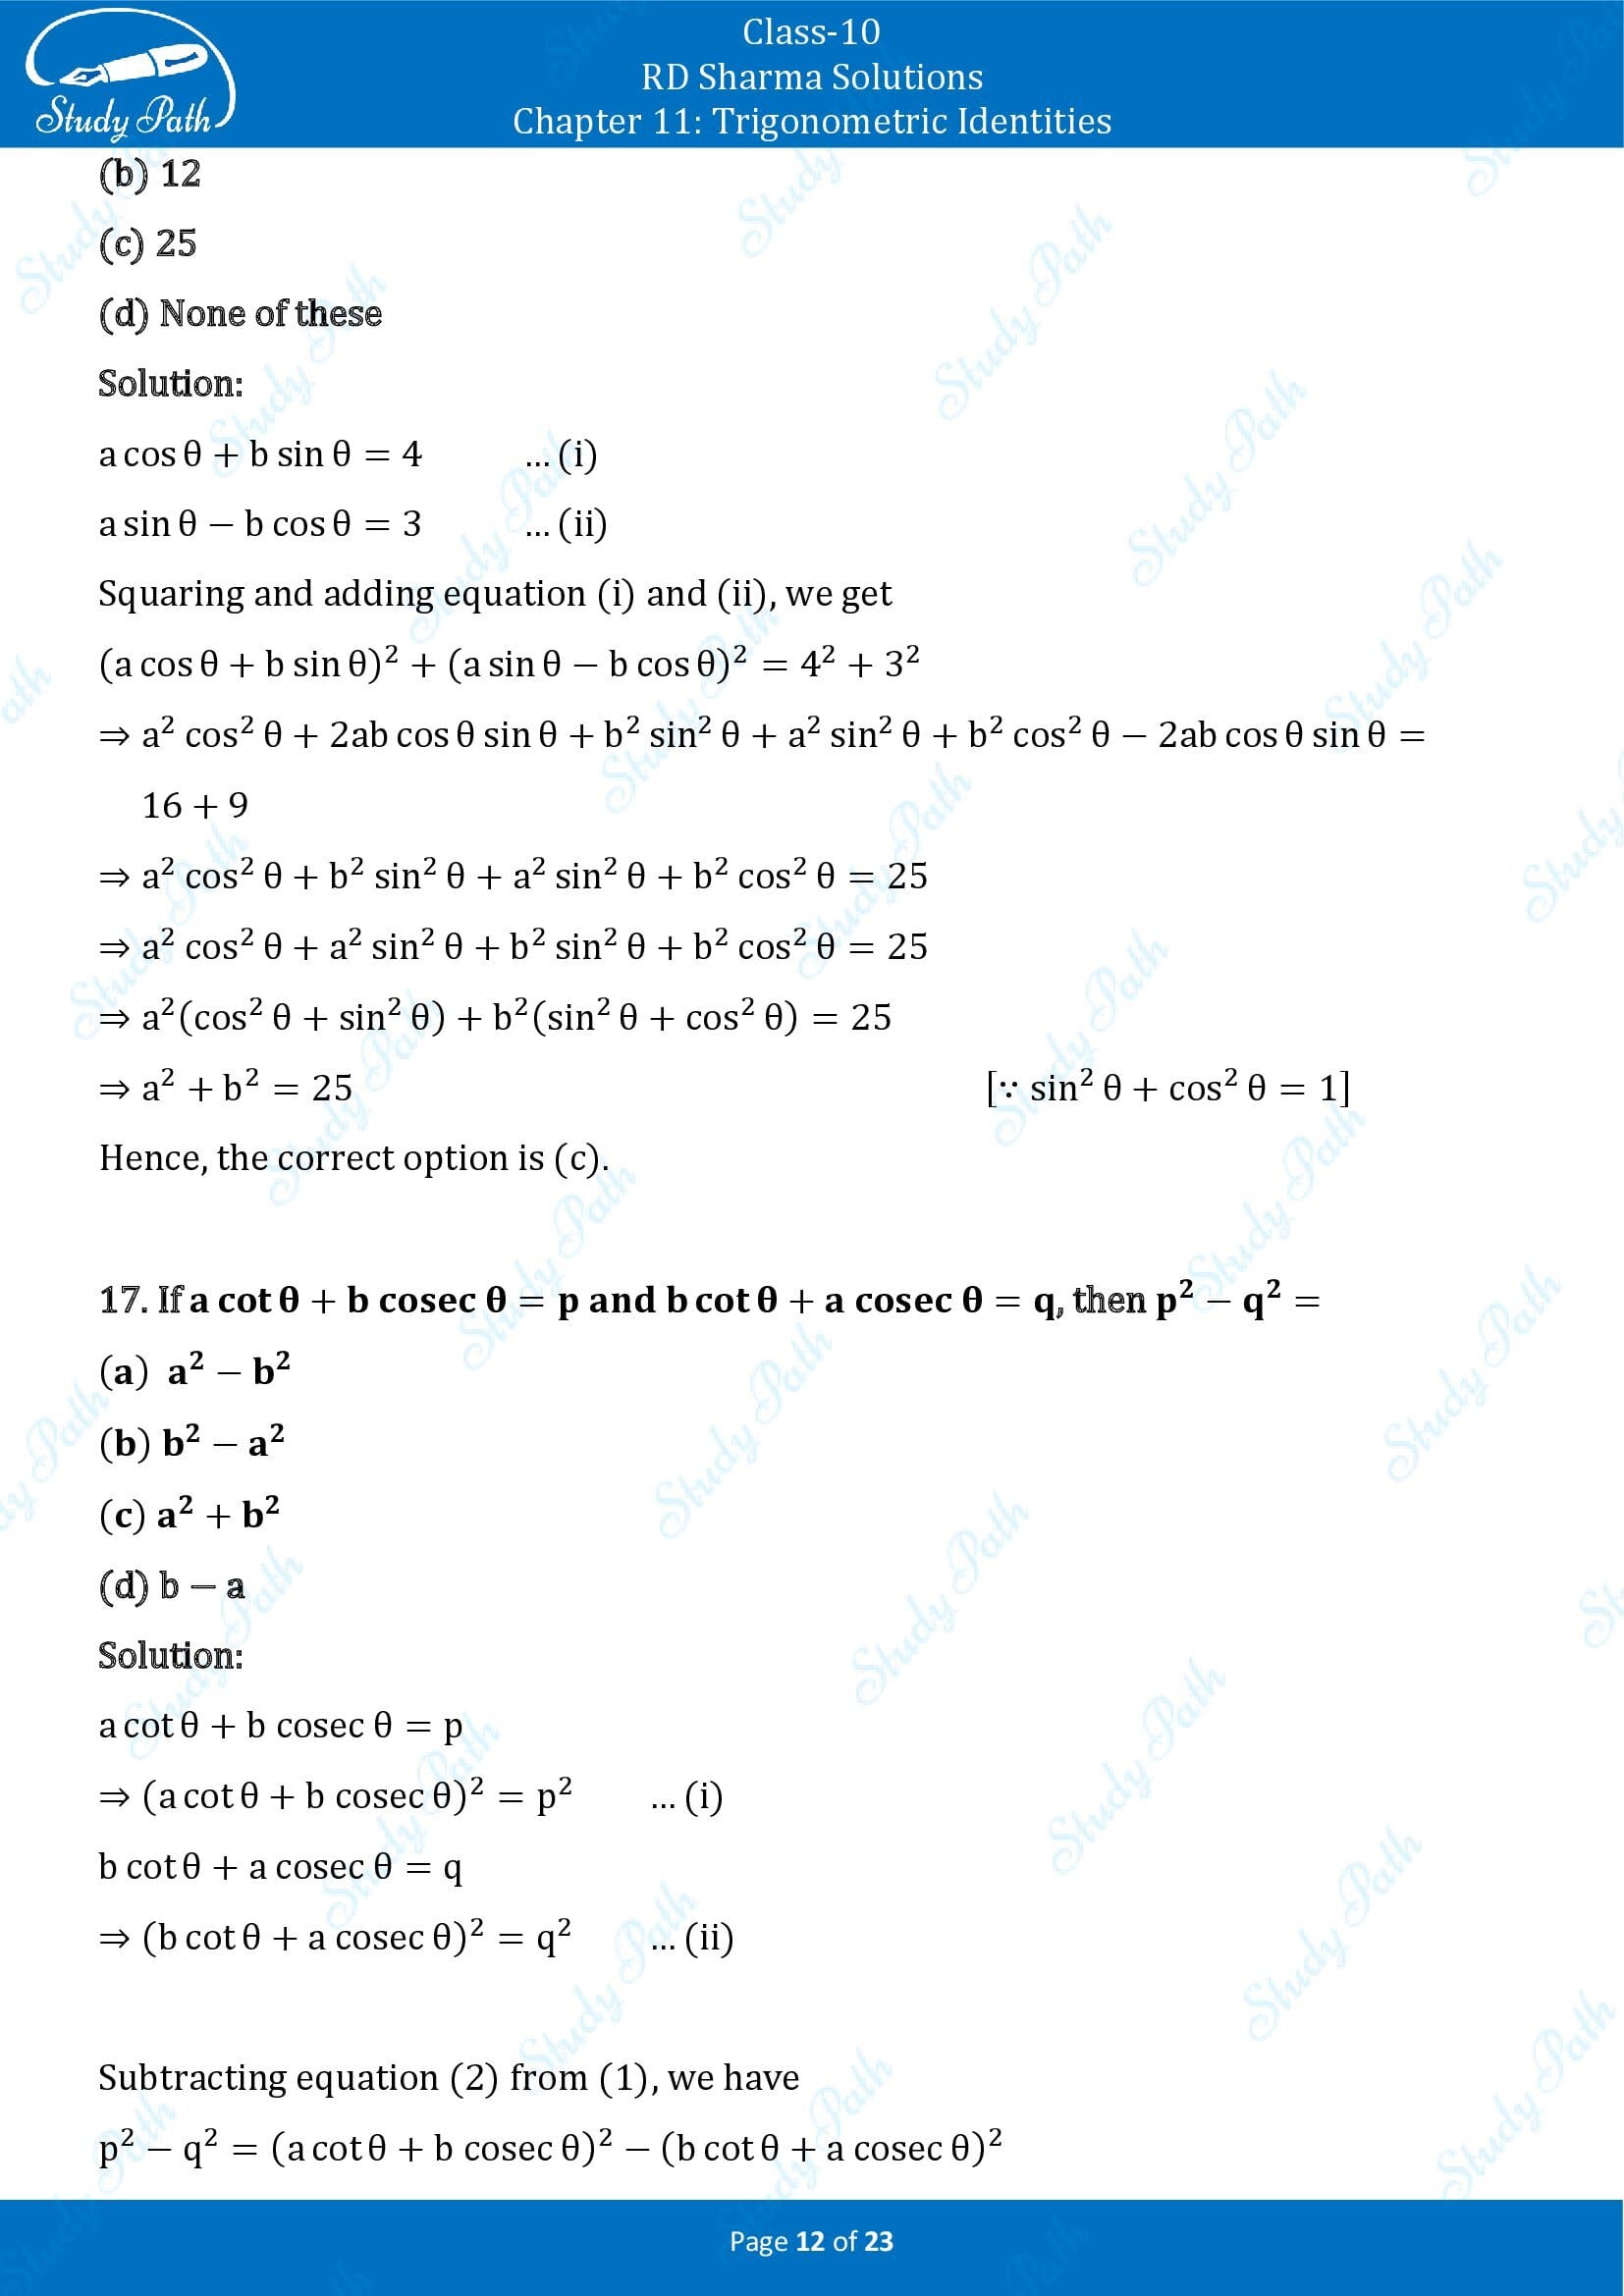 RD Sharma Solutions Class 10 Chapter 11 Trigonometric Identities Multiple Choice Questions MCQs 00012